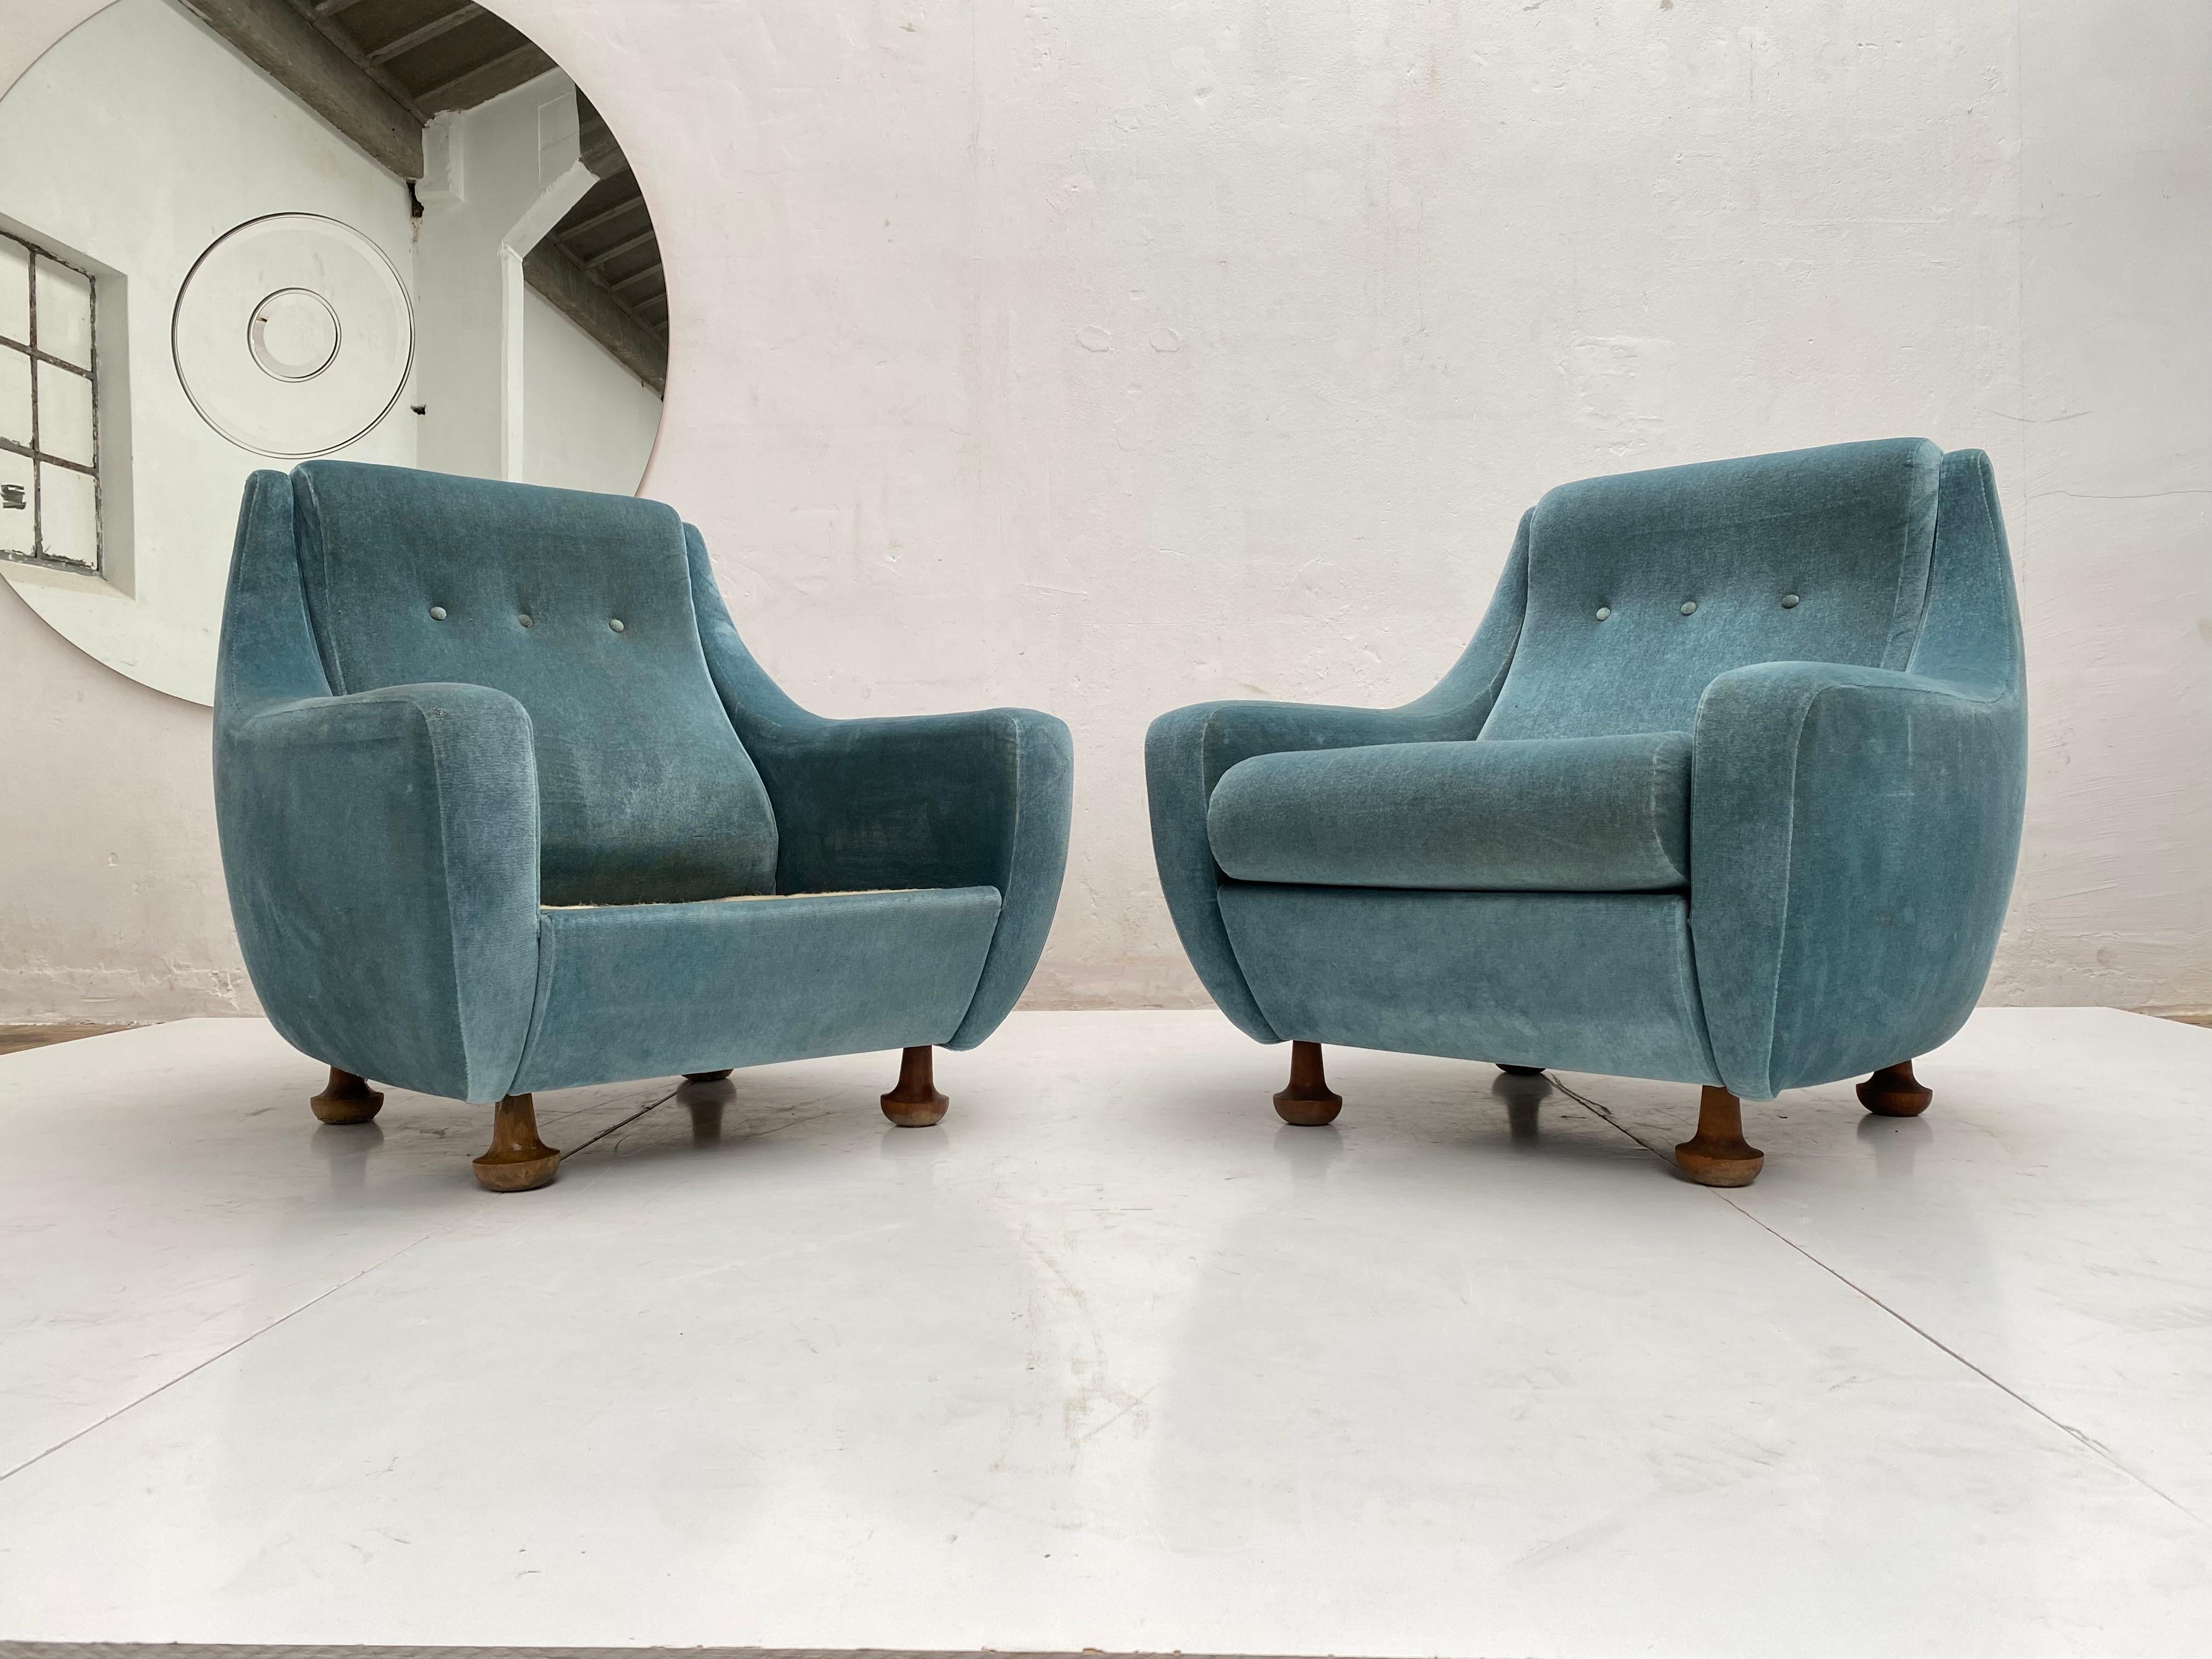 Pair of Rare 60's Organic Curved Lounge Chairs by Airborne France New Upholstery For Sale 9